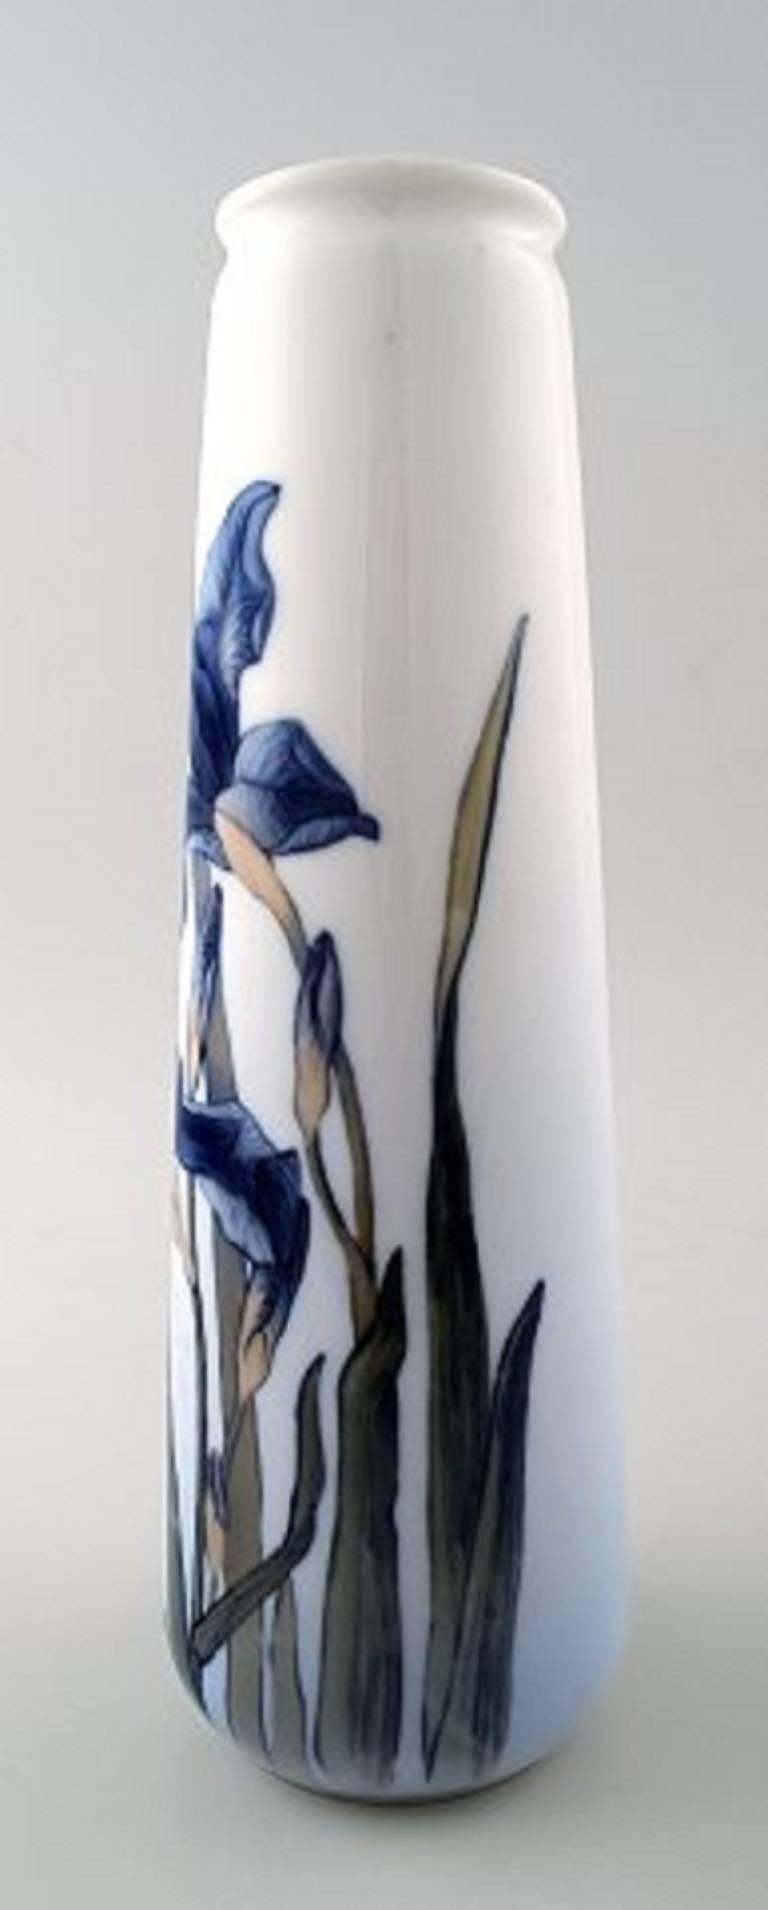 B & G / Bing & Grondahl Art Nouveau vase decorated with flowers.

Measures 25 cm. Marked. 

Artist Signature SM

2. factory quality, in good condition, small firing crack.